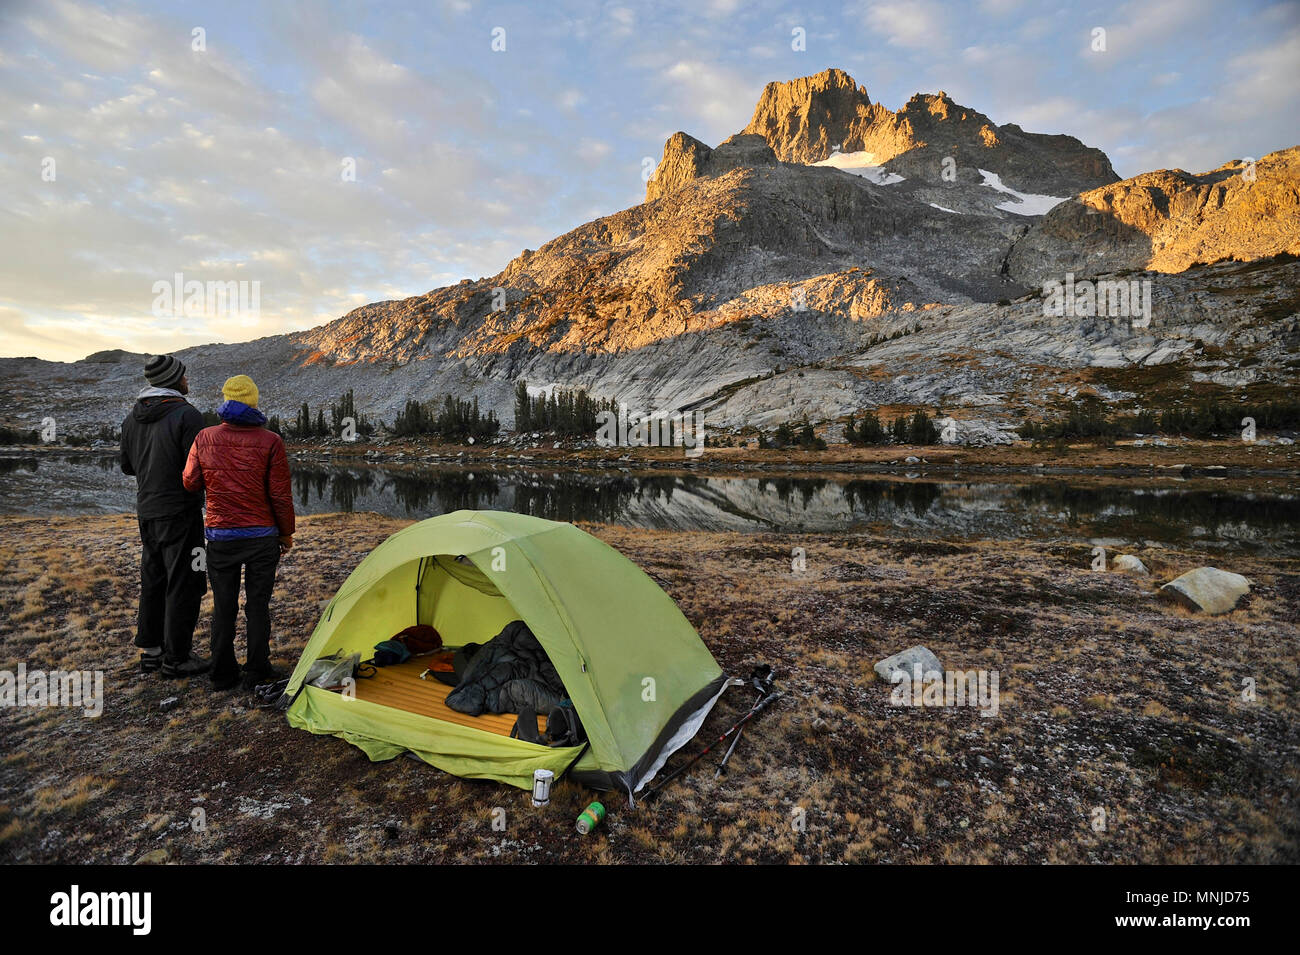 Backpackers camp near Thousand Island Lake with Banner Peak in background on trek of Sierra High Route in Minarets Wilderness, Inyo National Forest, California, USA Stock Photo